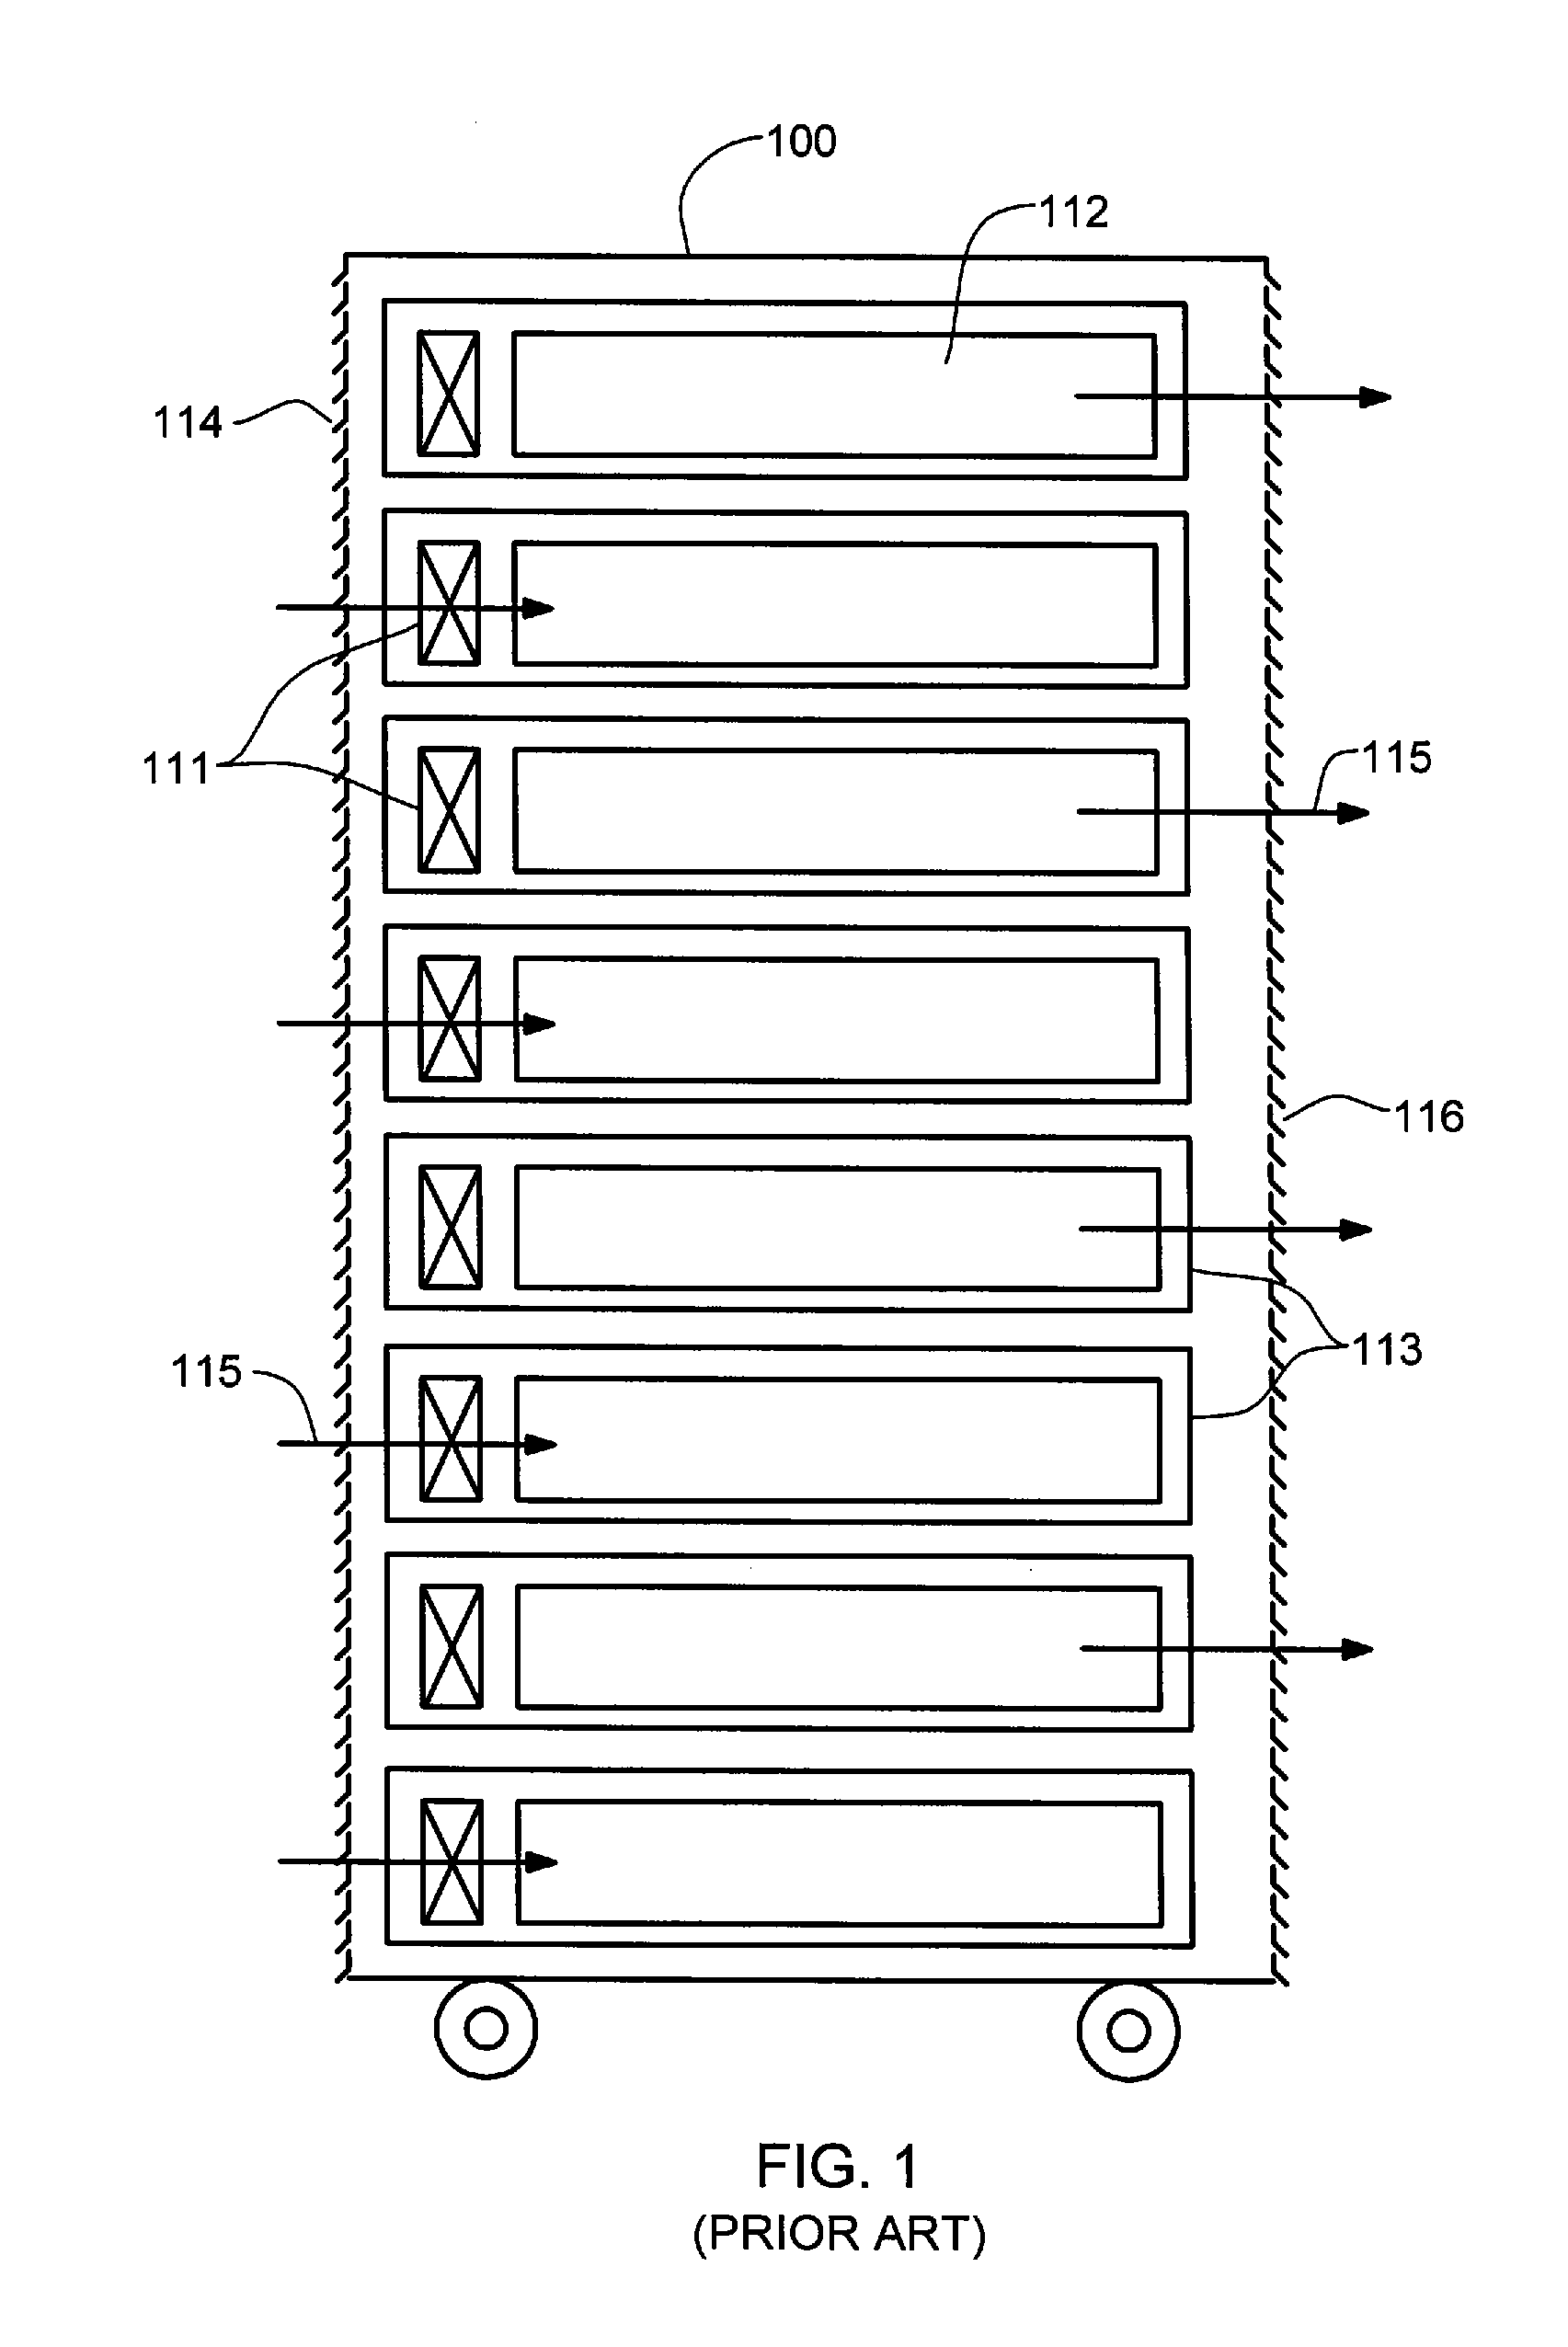 Conductive heat transport cooling system and method for a multi-component electronics system